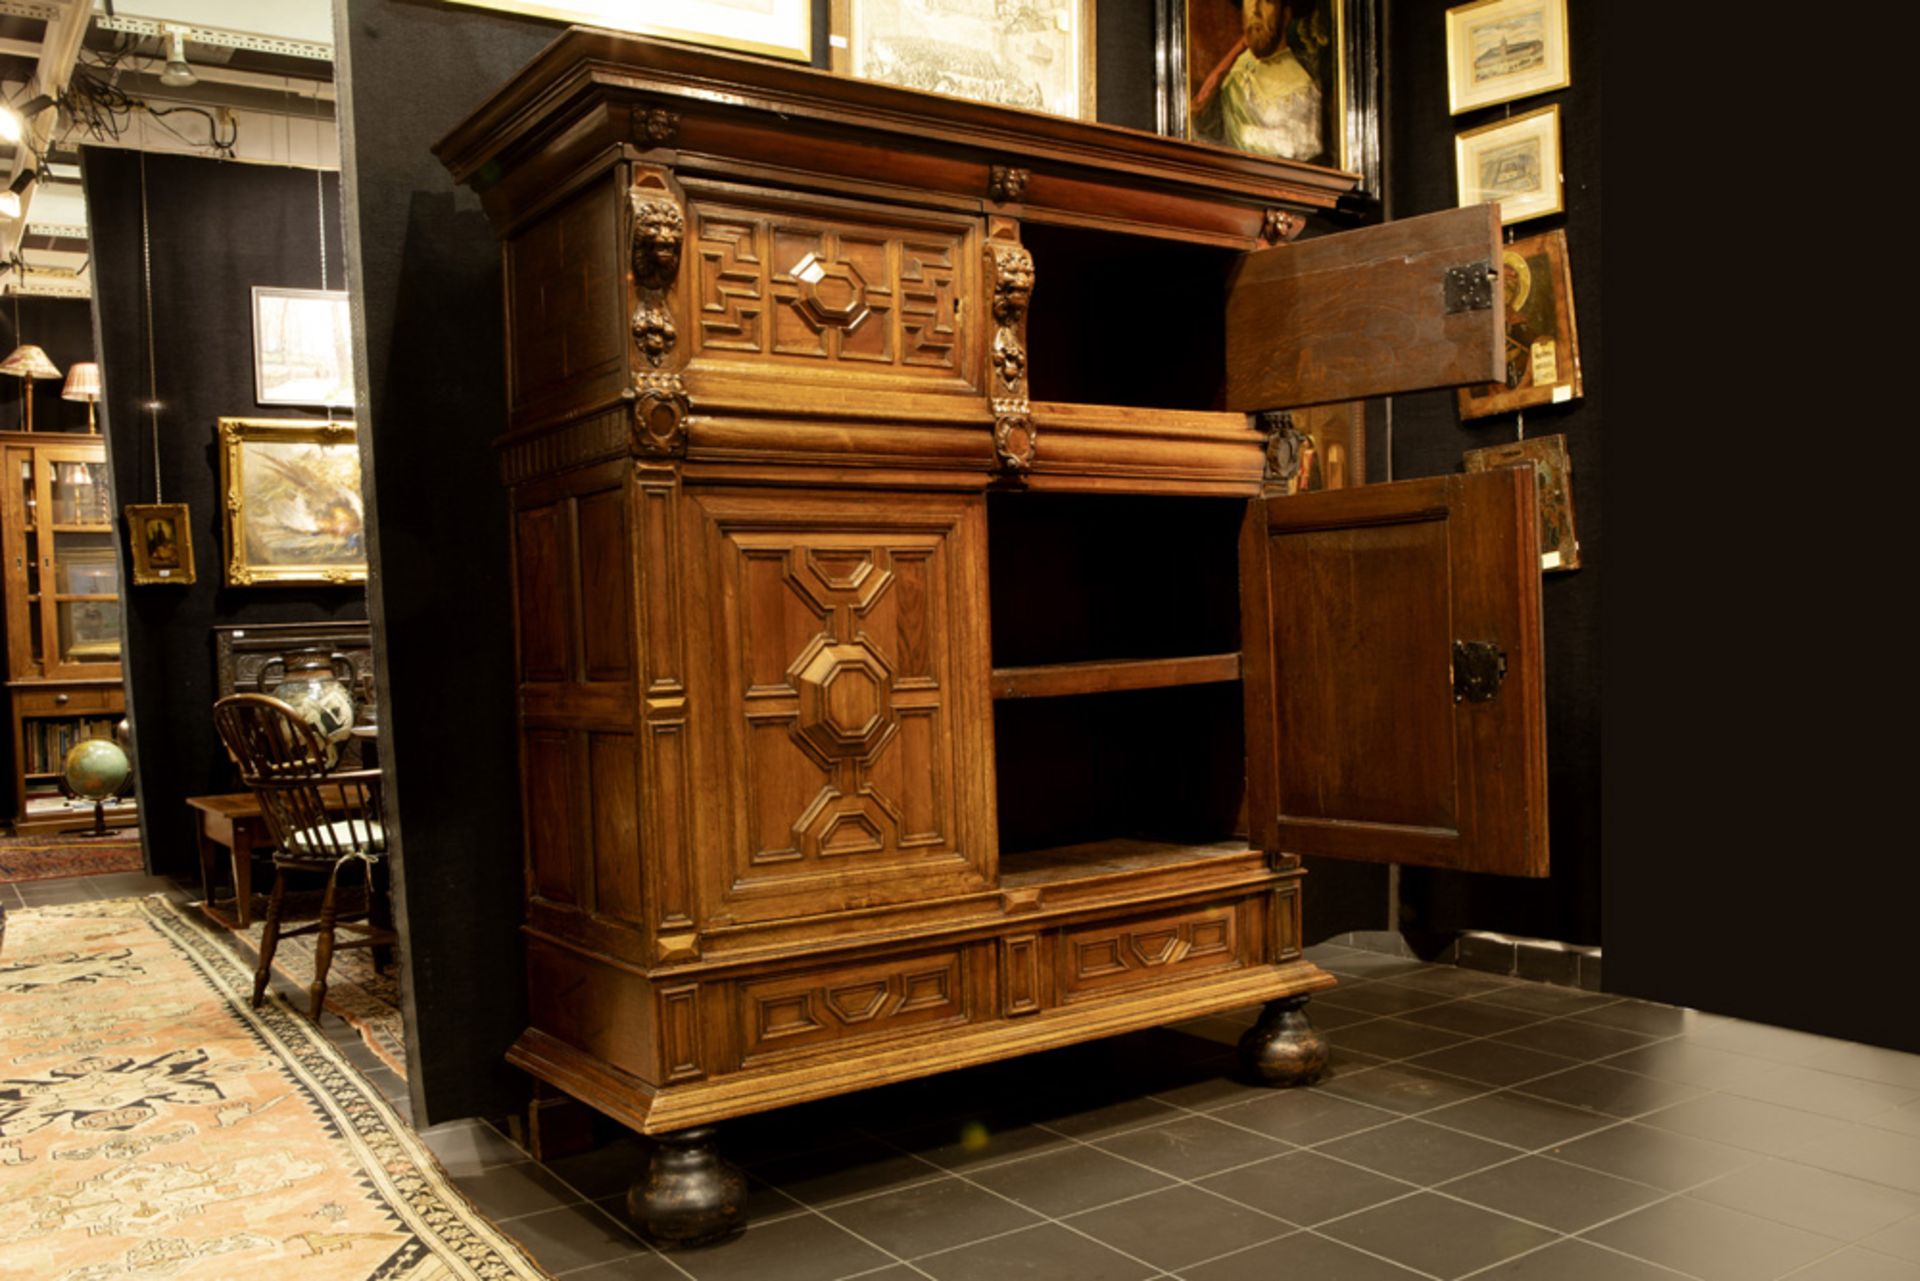 17th/18th Cent. Renaissance style cupbaoard in oak and walnut with typical sculpted ornamentation || - Image 2 of 2